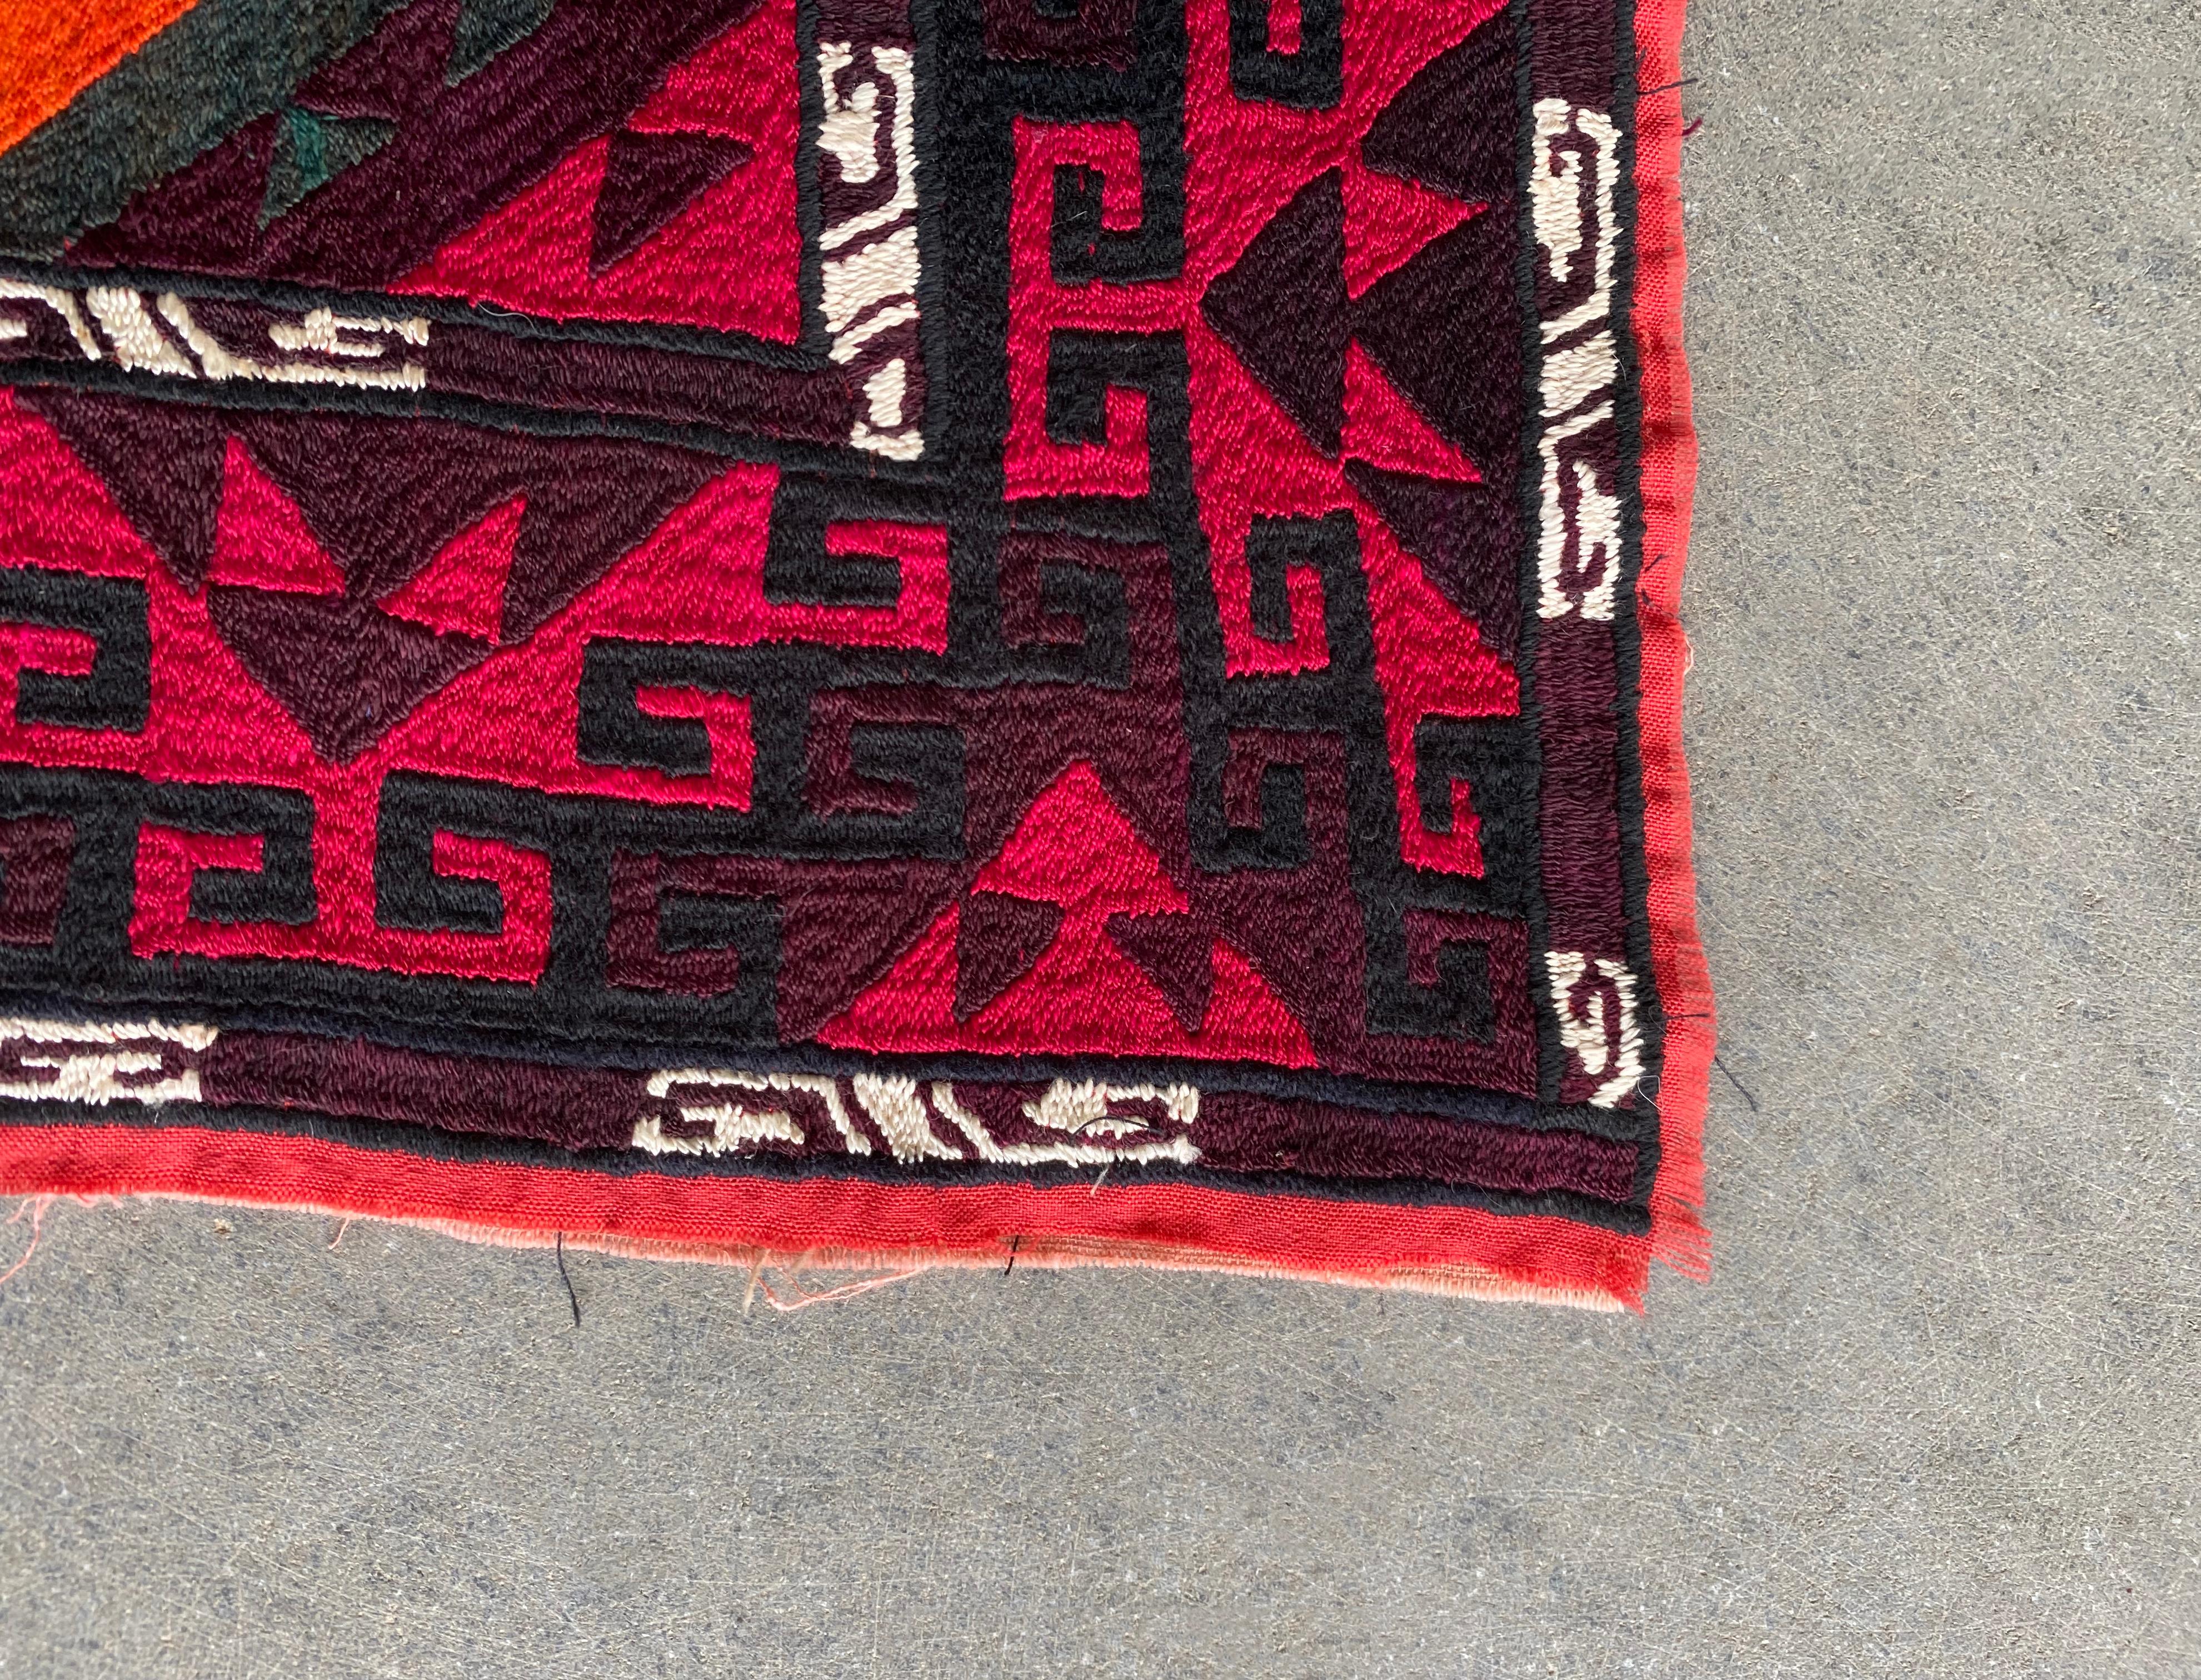 Hand-Woven Central Asian Embroidered Textile, “Suzani”, Mid 20th Century  For Sale